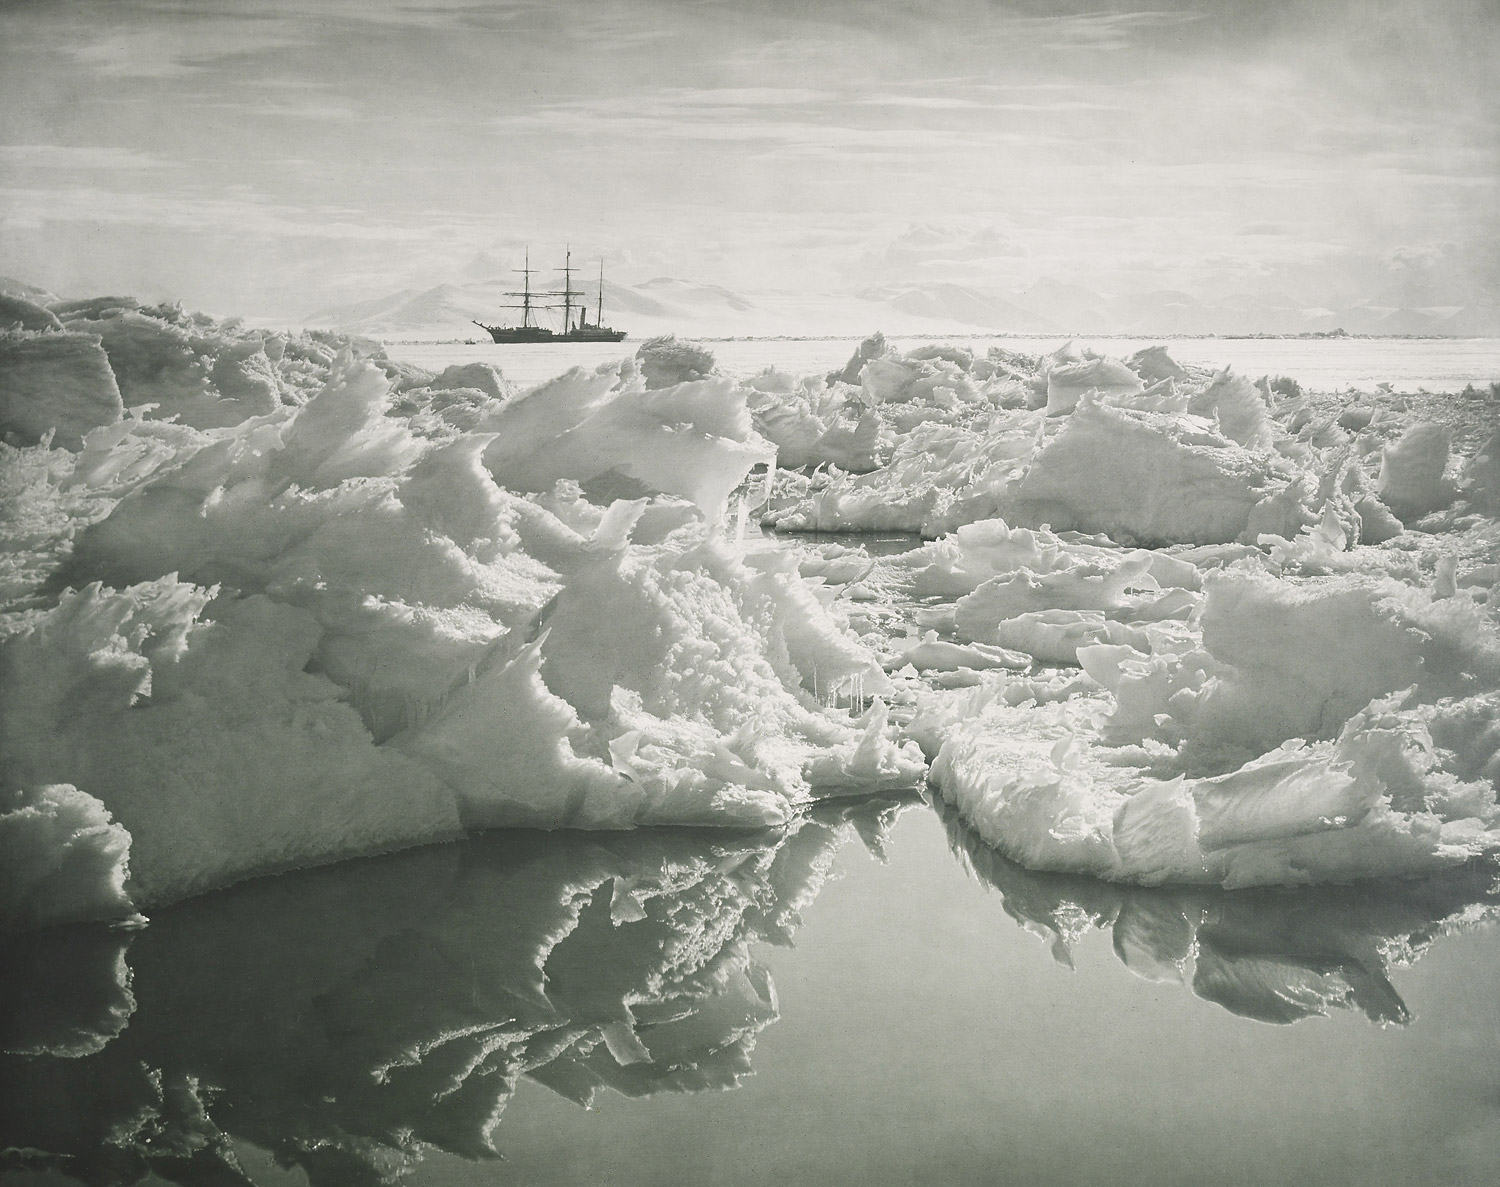 The Terra Nova in McMurdo Sound. Ponting took this view of the Terra Nova while standing on the shifting ice floes. The ship had reached Antartica only a few days previously on January 7, 1911.